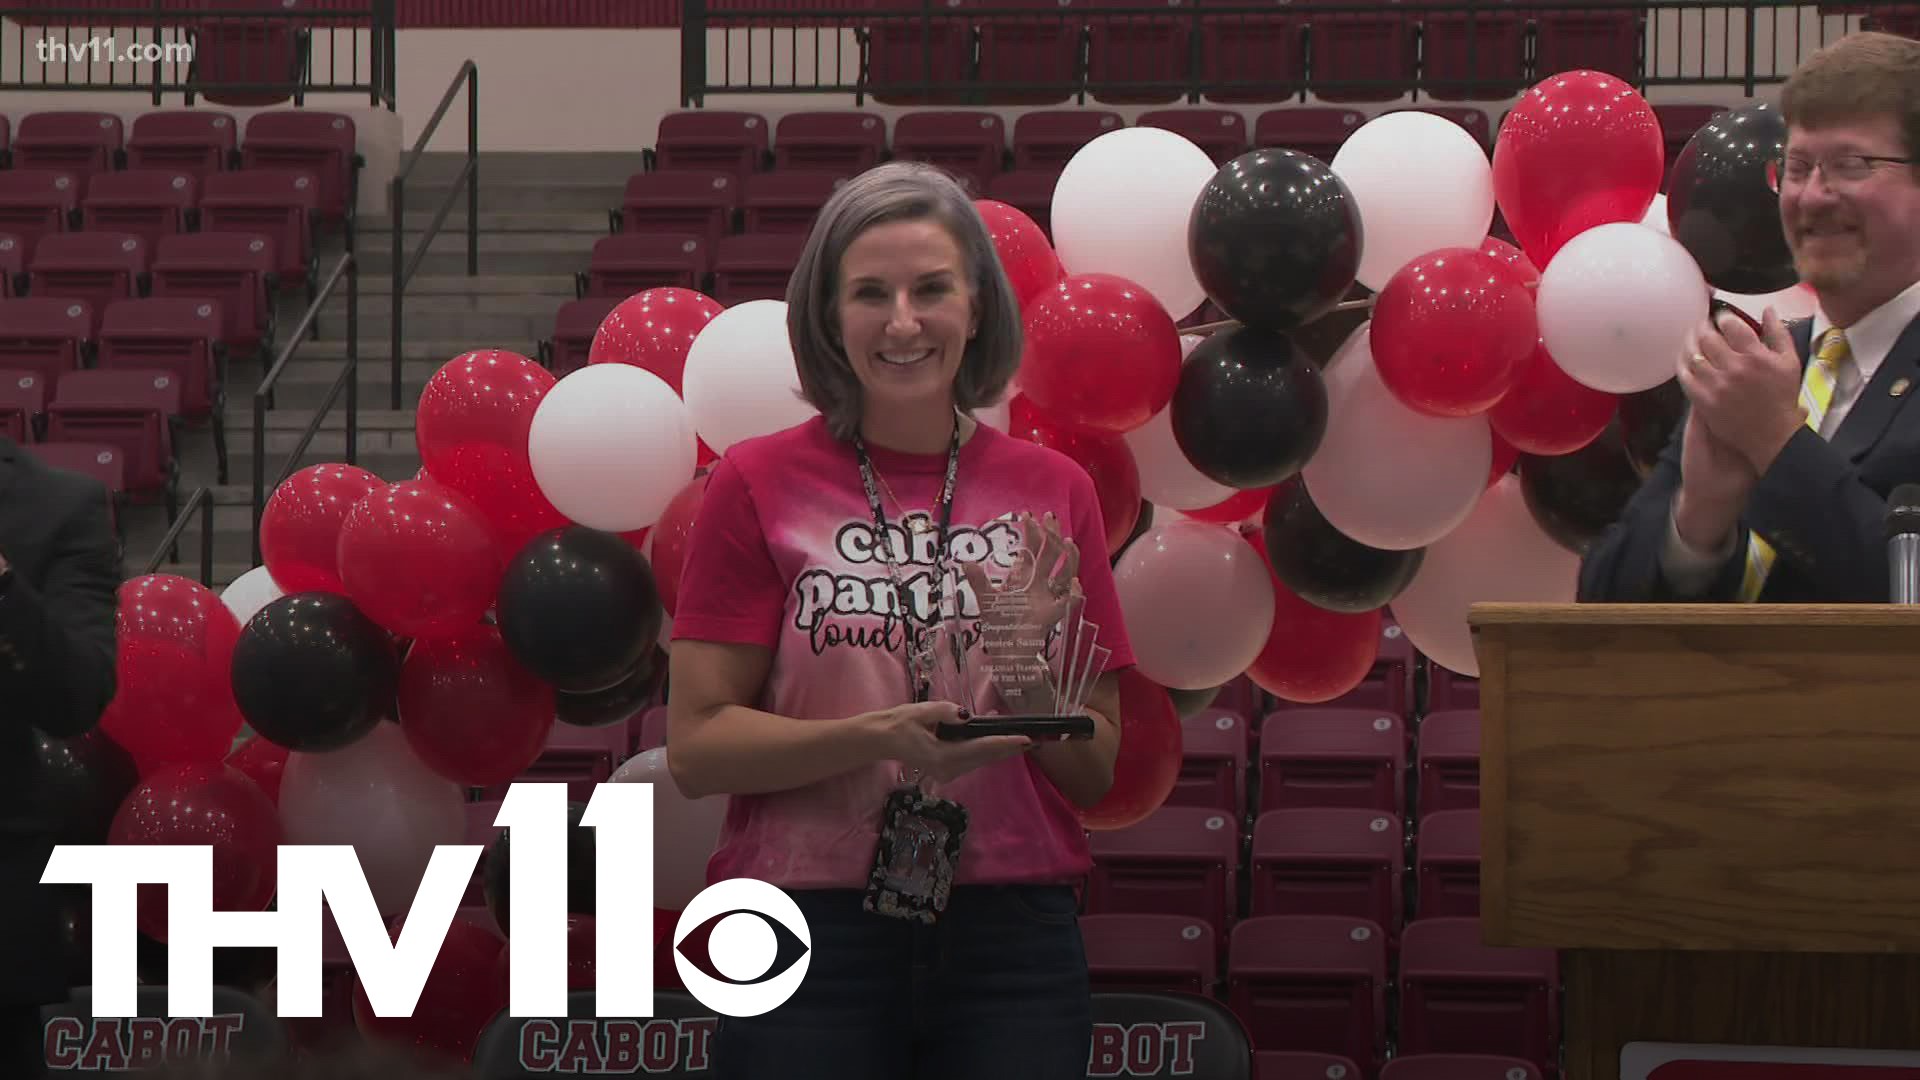 One teacher in Cabot was recognized for her devotion in a gymnasium filled with children that she aims to help every day.